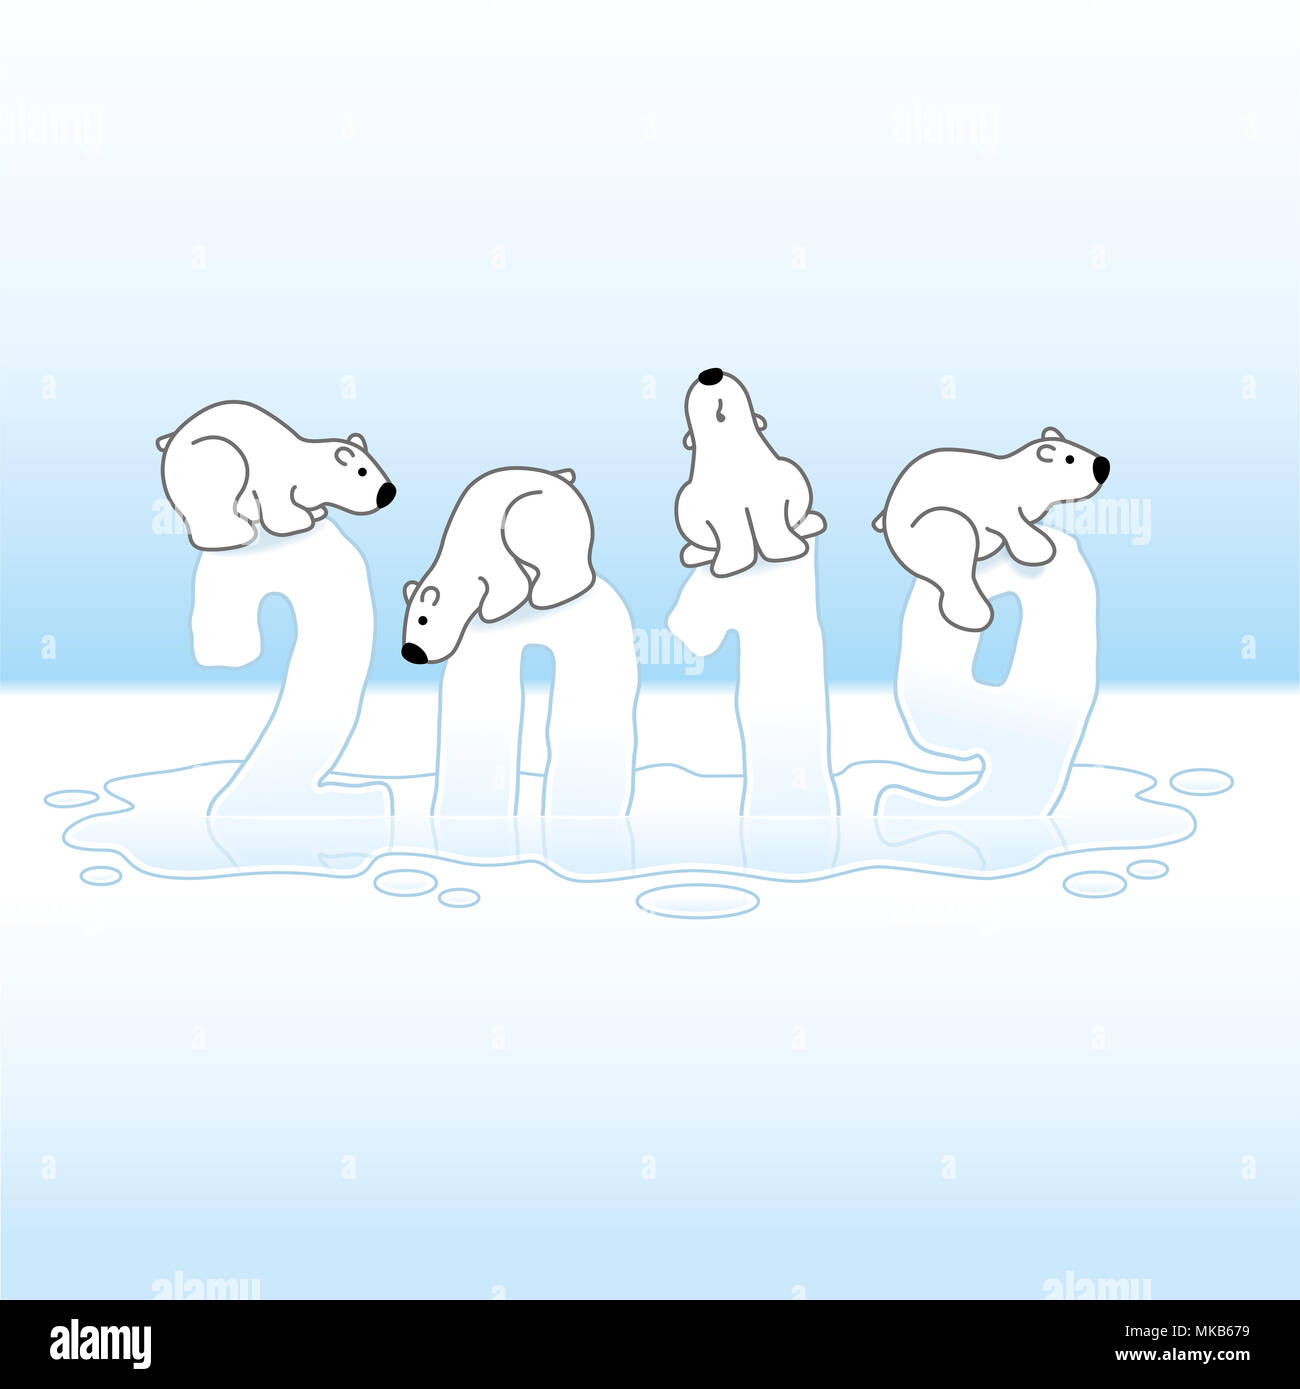 Four Cute Polar Bears Balancing on Melting New Year 2019 with Reflections in an Ice Cold Puddle Stock Photo